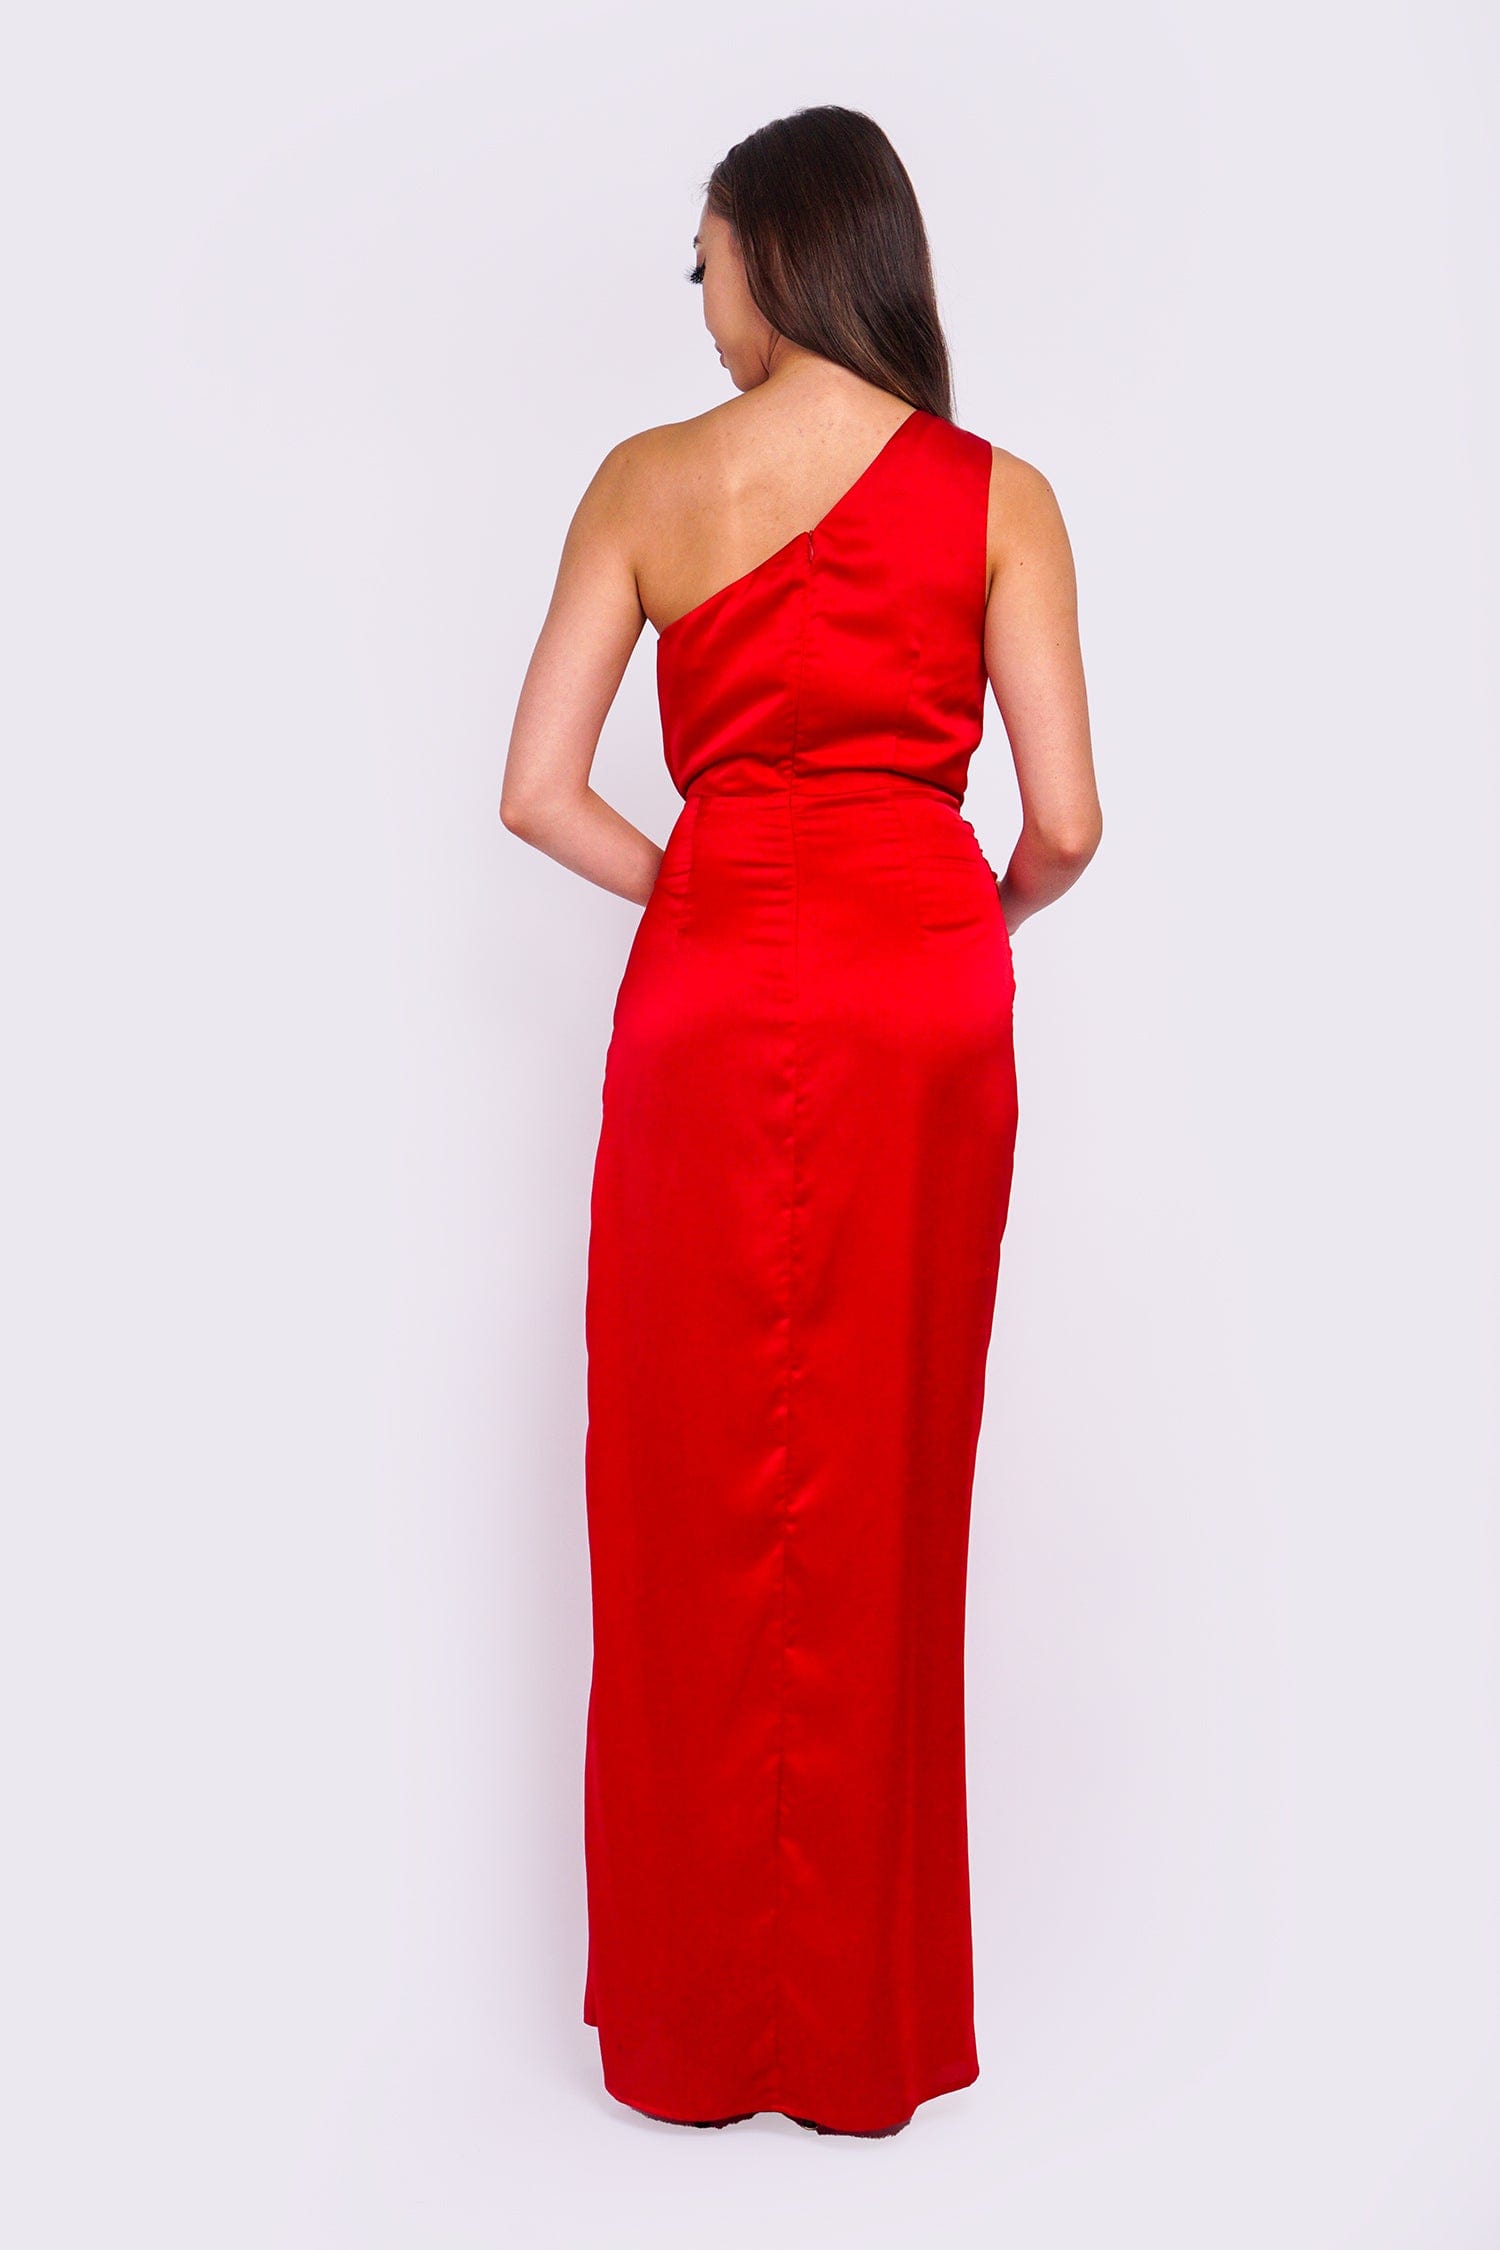 DCD GOWNS Red One Shoulder Drape Gown